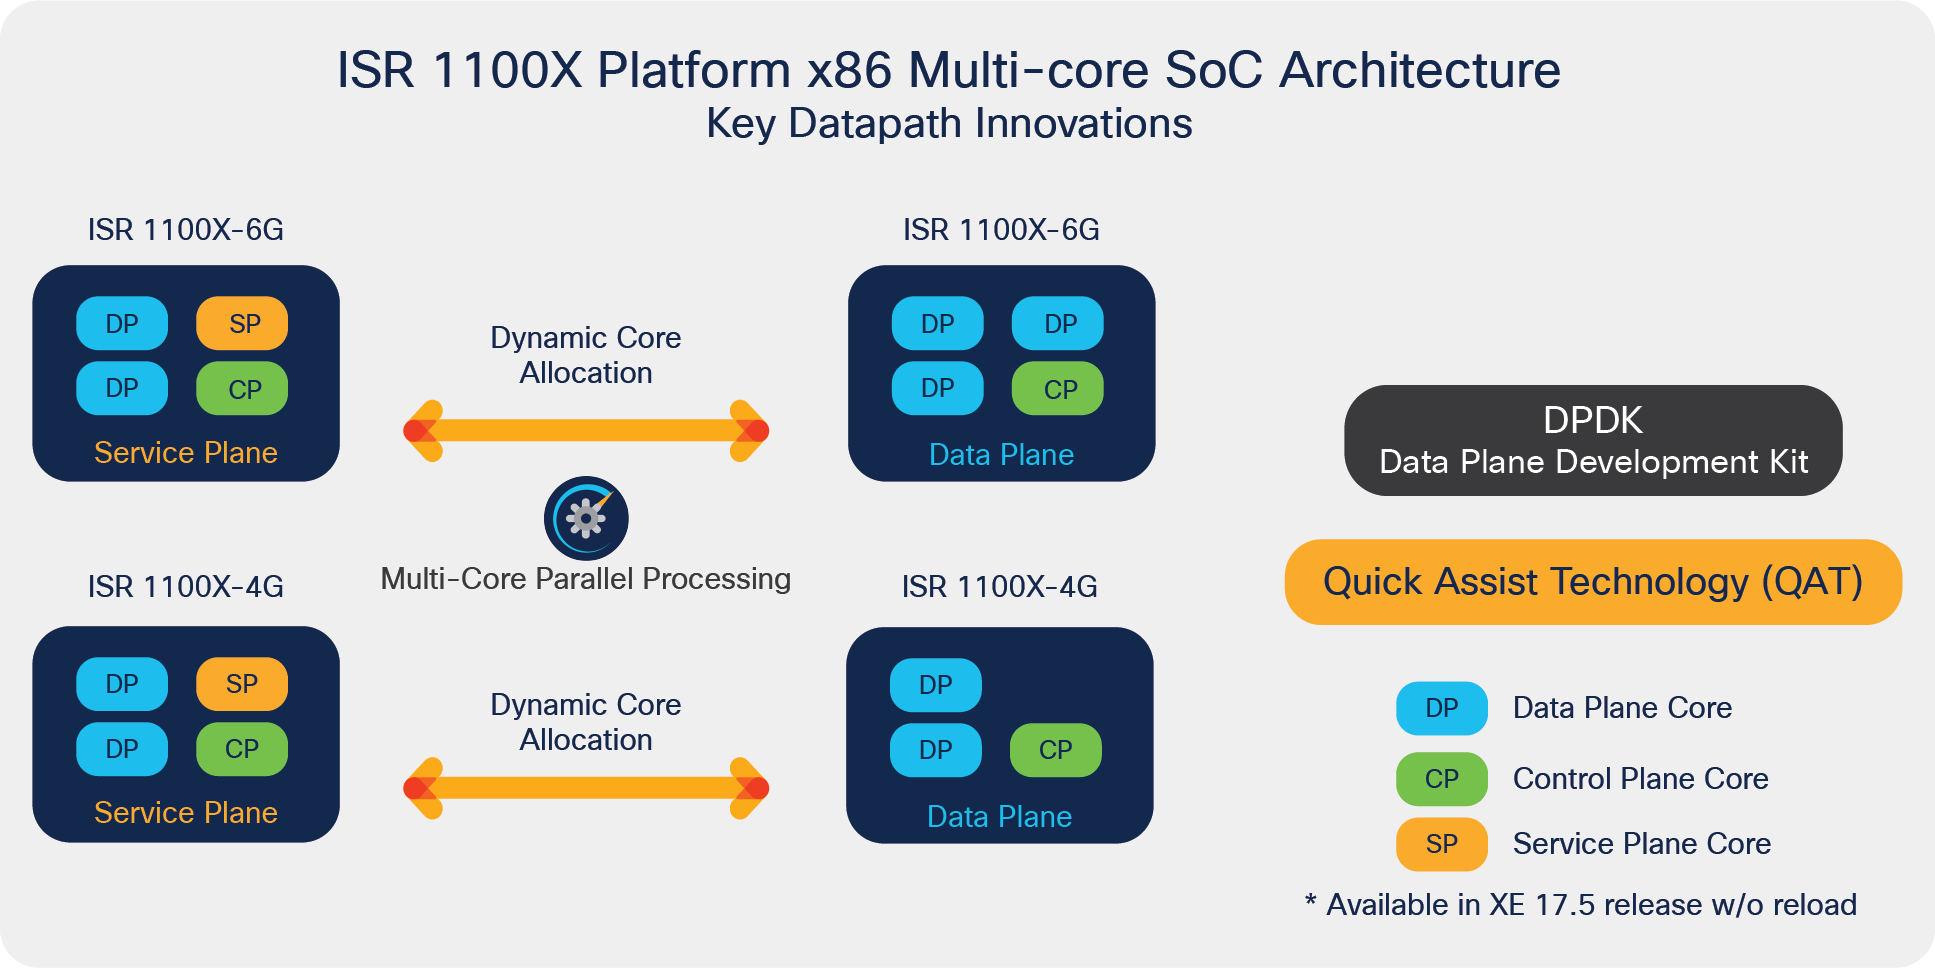 Dynamic core allocation in the ISR 1100X-4G and ISR 1100X-6G platforms